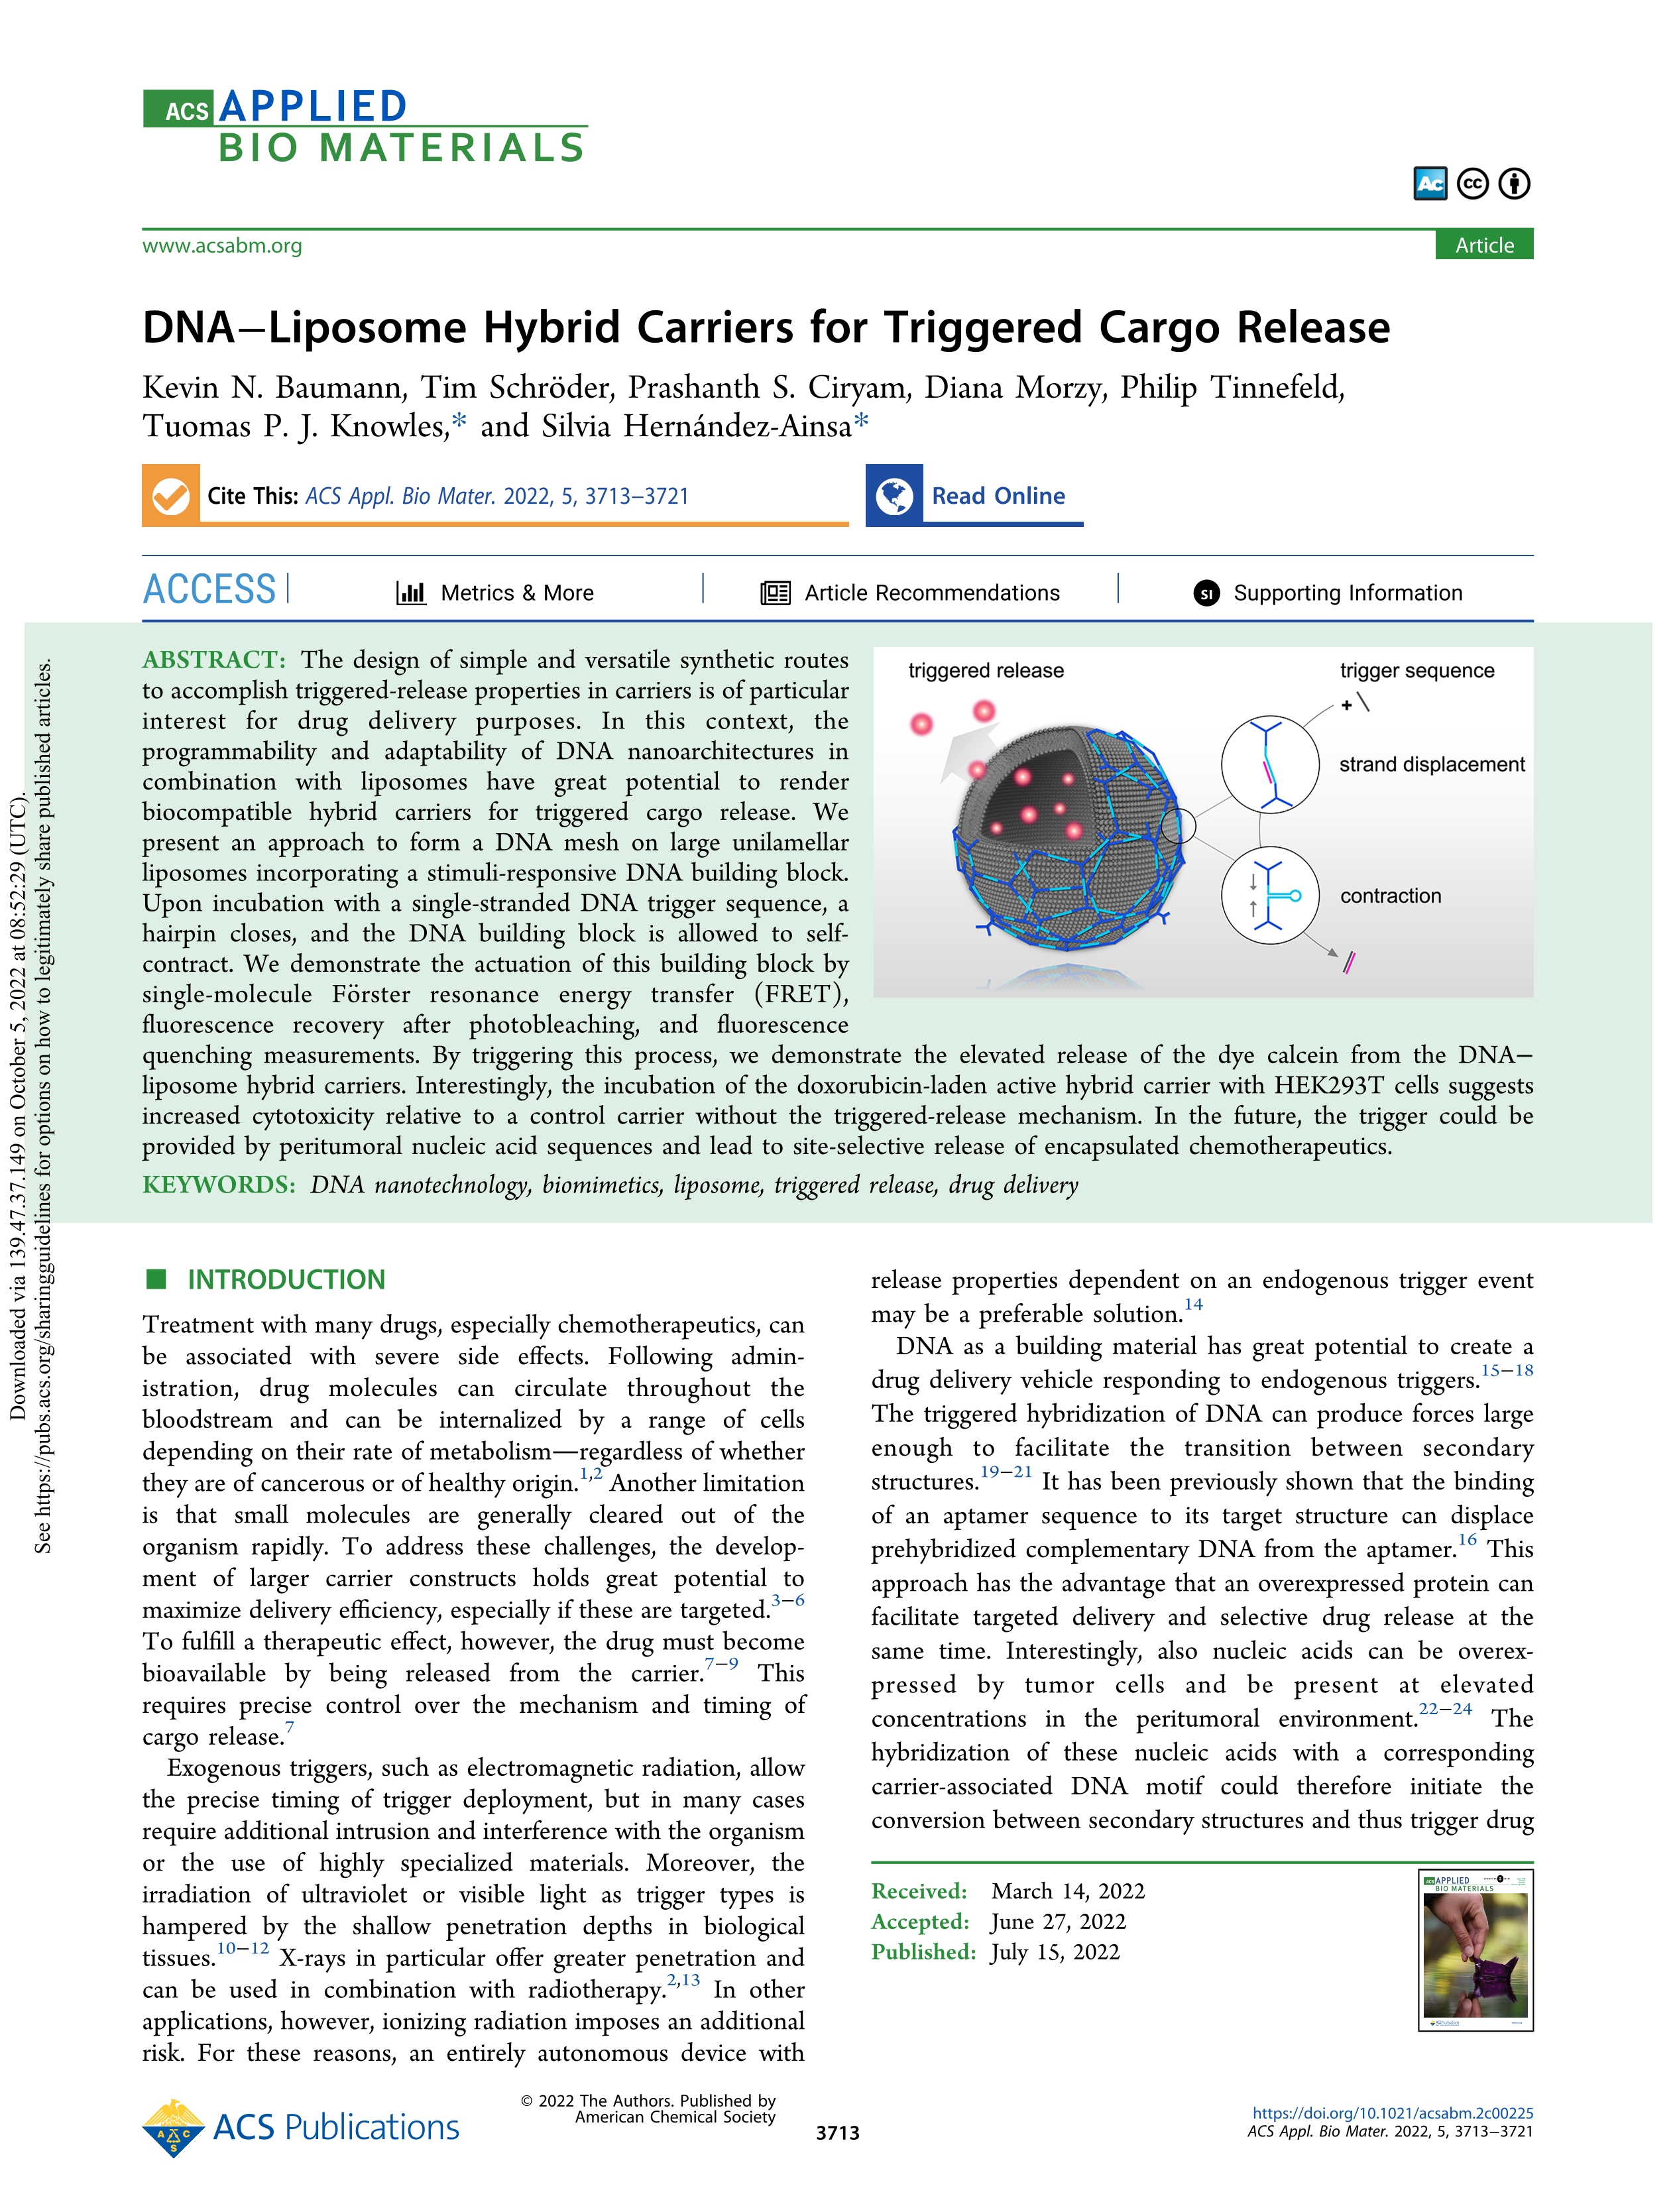 DNA-Liposome Hybrid Carriers for Triggered Cargo Release